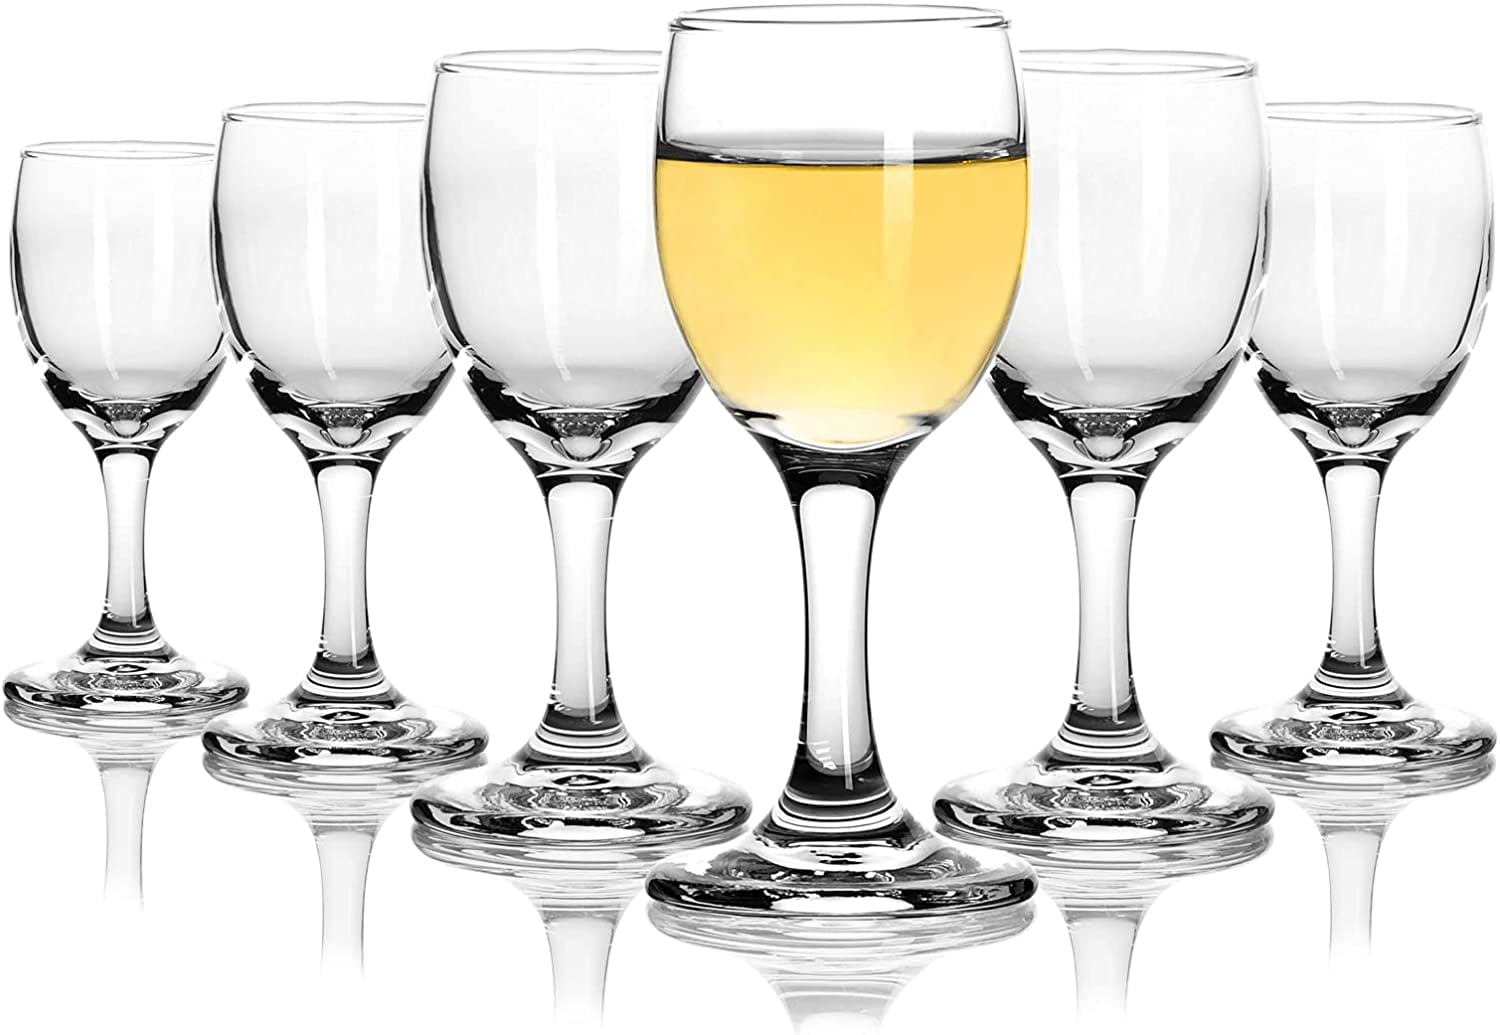 KLP Mini Wine Glasses Cute Shot Glasses Great for White and Red